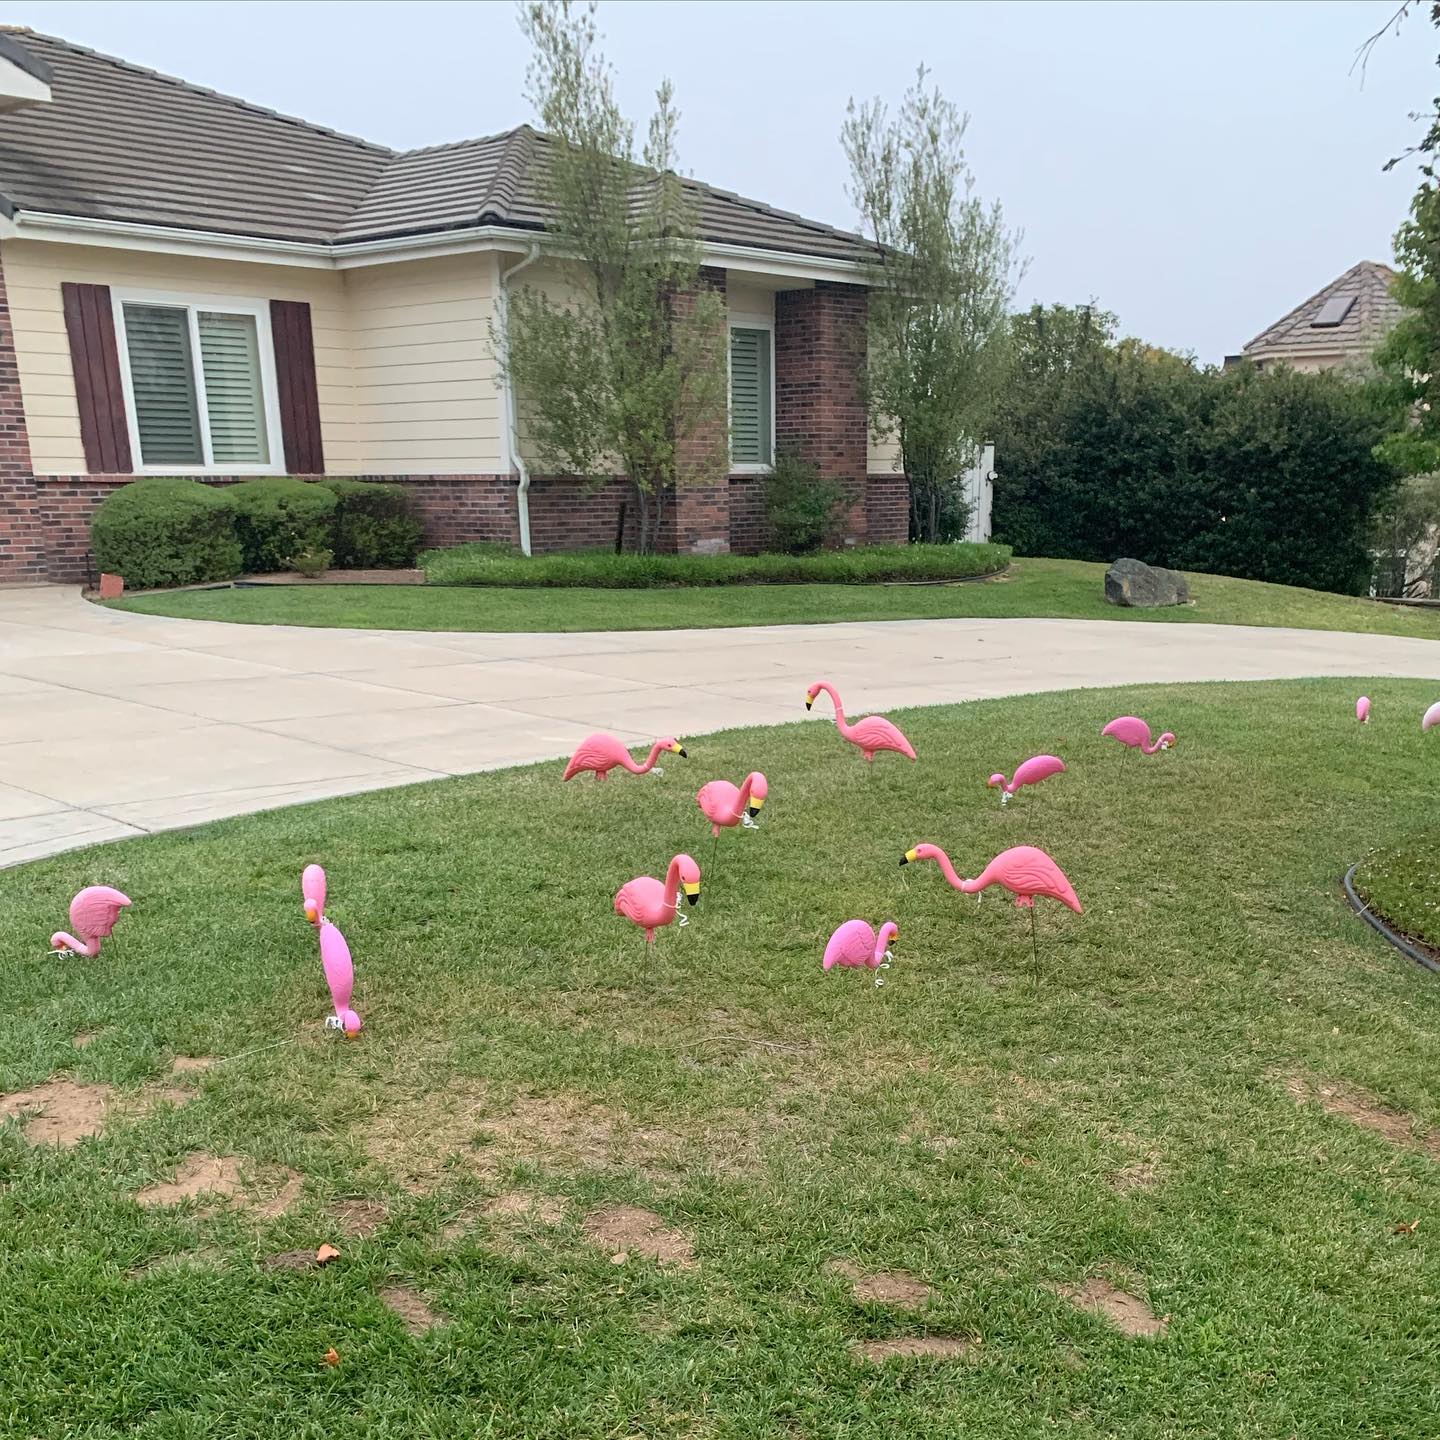 We got flocked last night! 🤔😂 🦩 🦩🦩🦩🦩🦩🦩 I searched the front porch and mailbox for a ransom note, but came up empty handed. 🤷🏼‍♀️ Maybe they just flew in on their own to pick at the bugs in the lawn. 🤔😝 A few of them look more robust and healthy than the others… perhaps one of them is a flock leader I can question. 😎 Short of paying for eradication, does anyone have any tasty bbq bird recipes? 🤷🏼‍♀️🦩🤤😬🫢🤣 #flamingoflocked